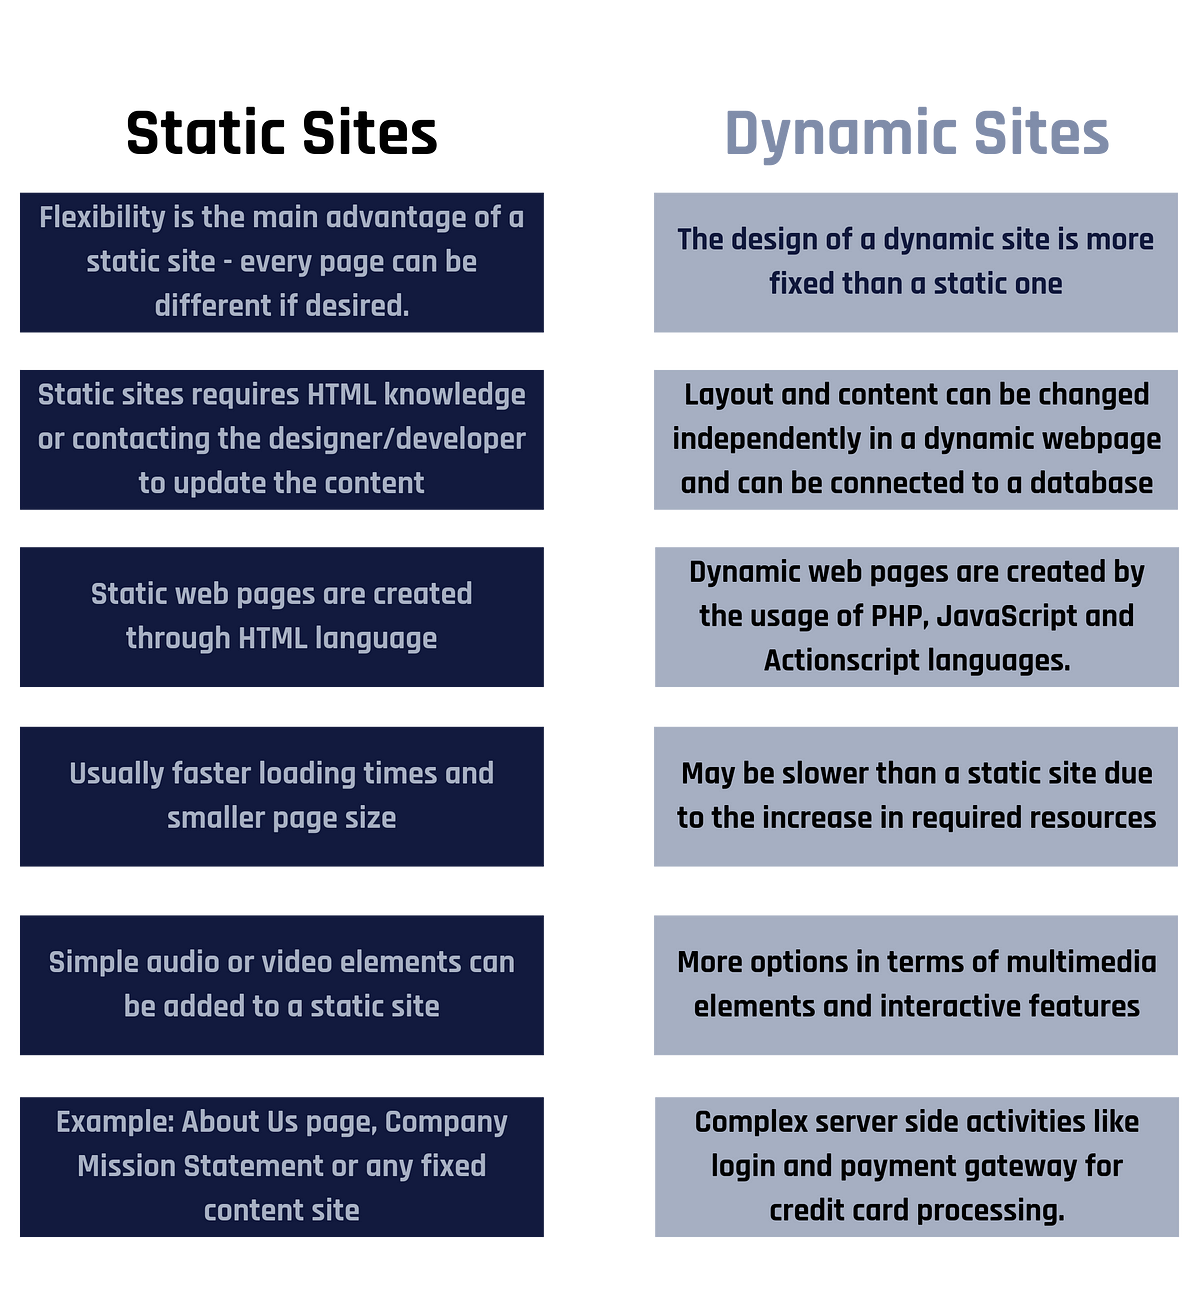 What is the difference between a static and dynamic website?